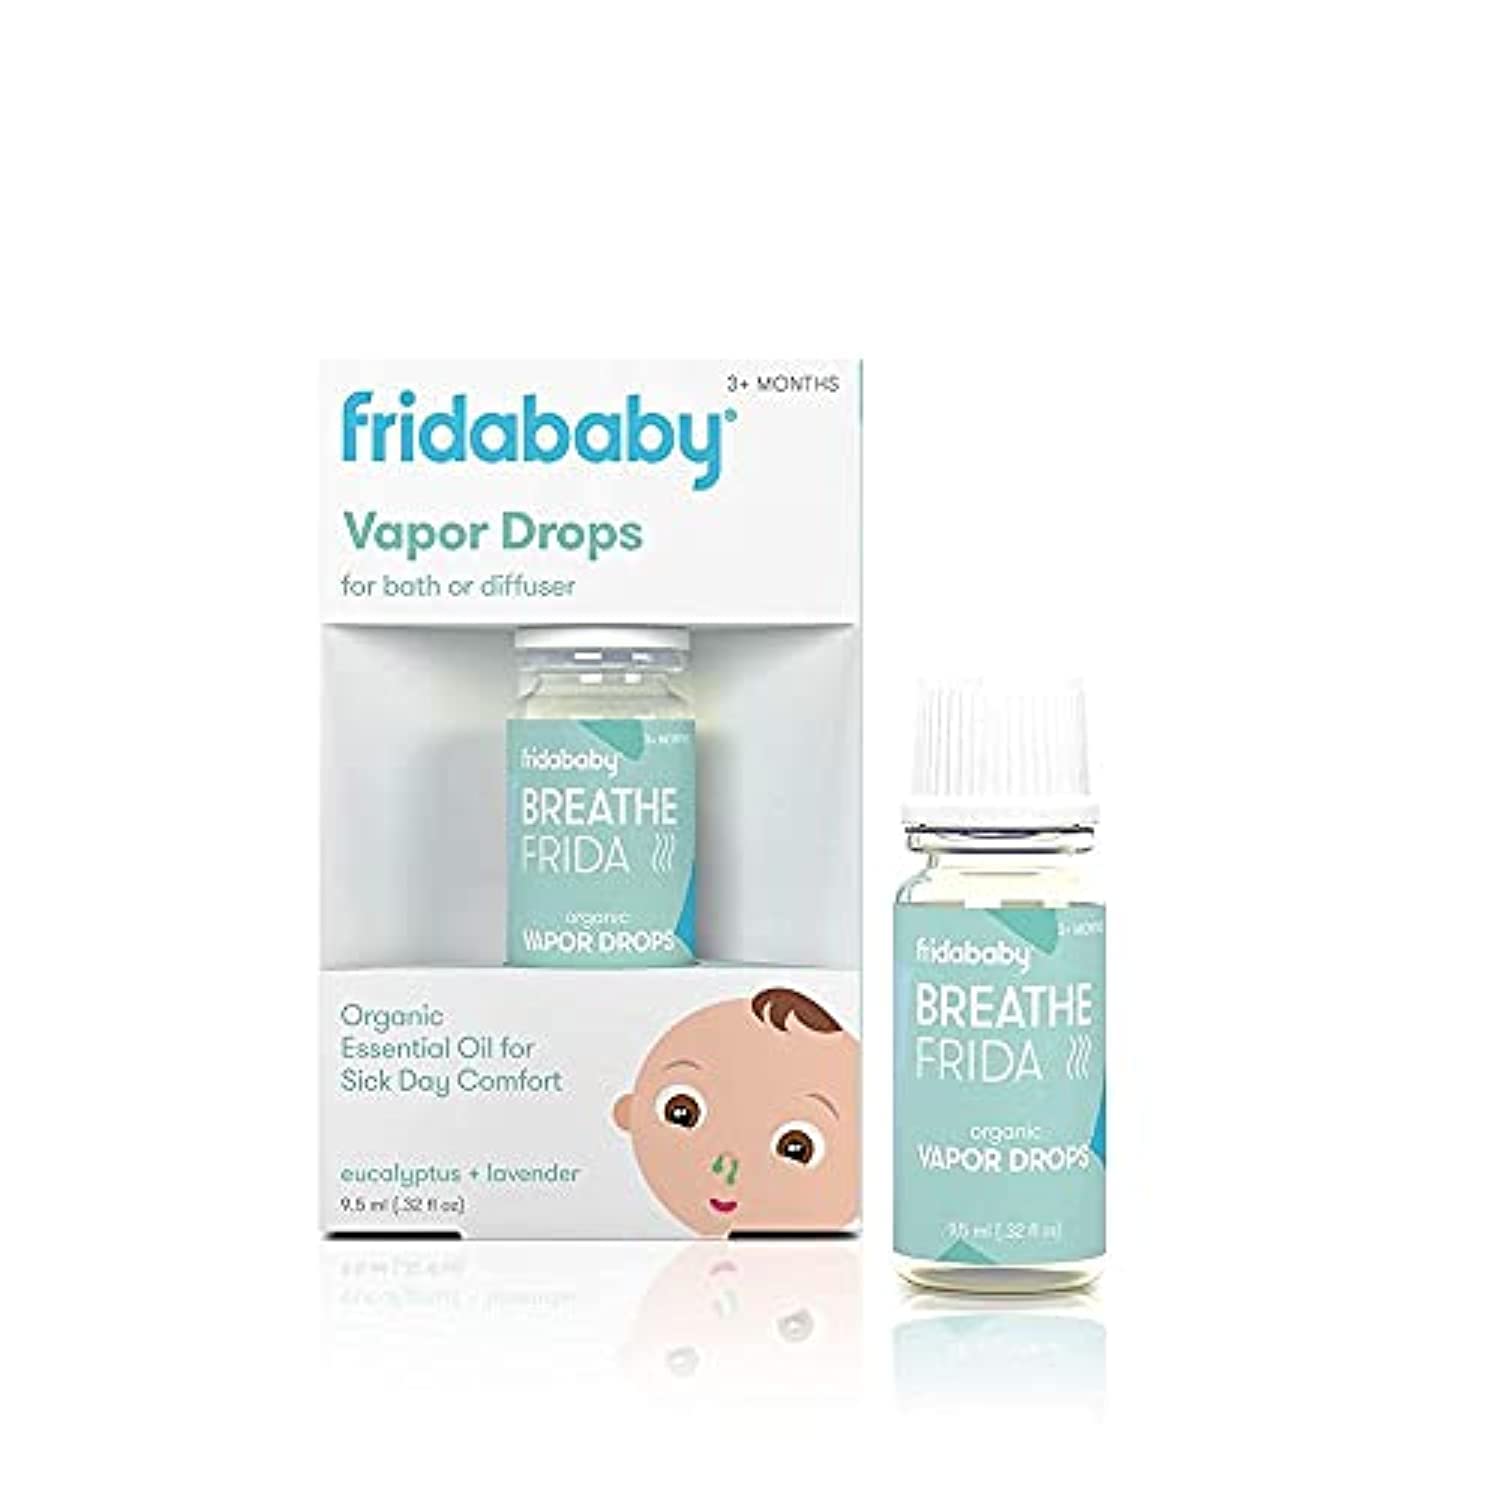 FridaBaby Natural Sleep Vapor Bath Drops for Bedtime Wind Down by Frida Baby, White & Breathefrida Vapor Bath Drops & Natural Vapor Bath Bombs, 3 Count